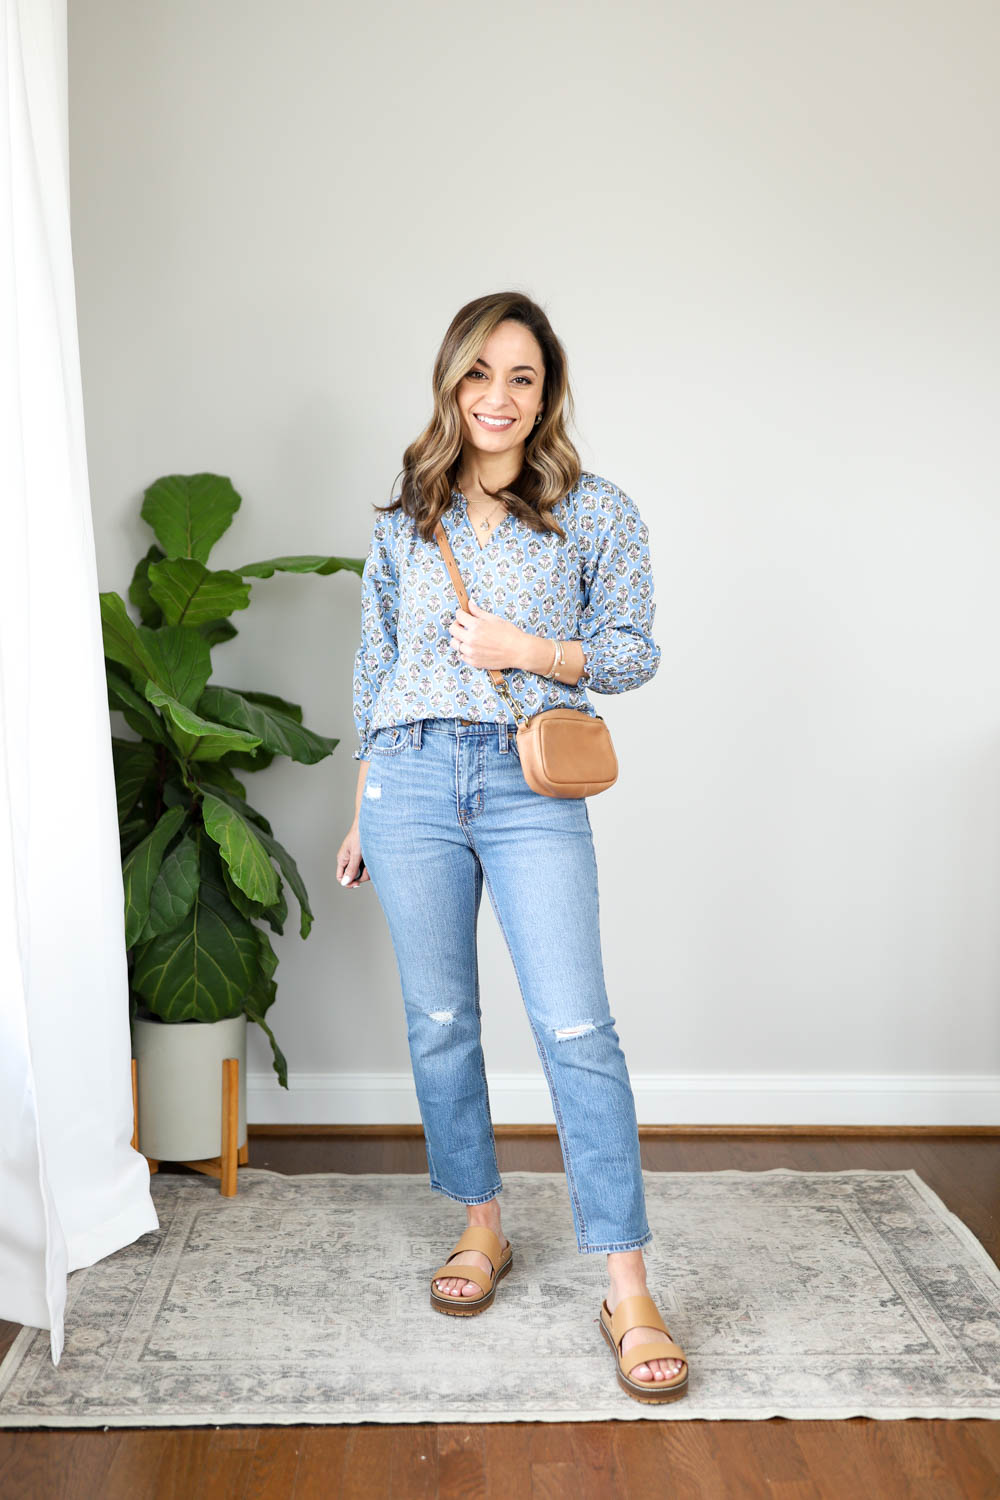 PETITE Business Casual Outfit Ideas For SPRING 2023!